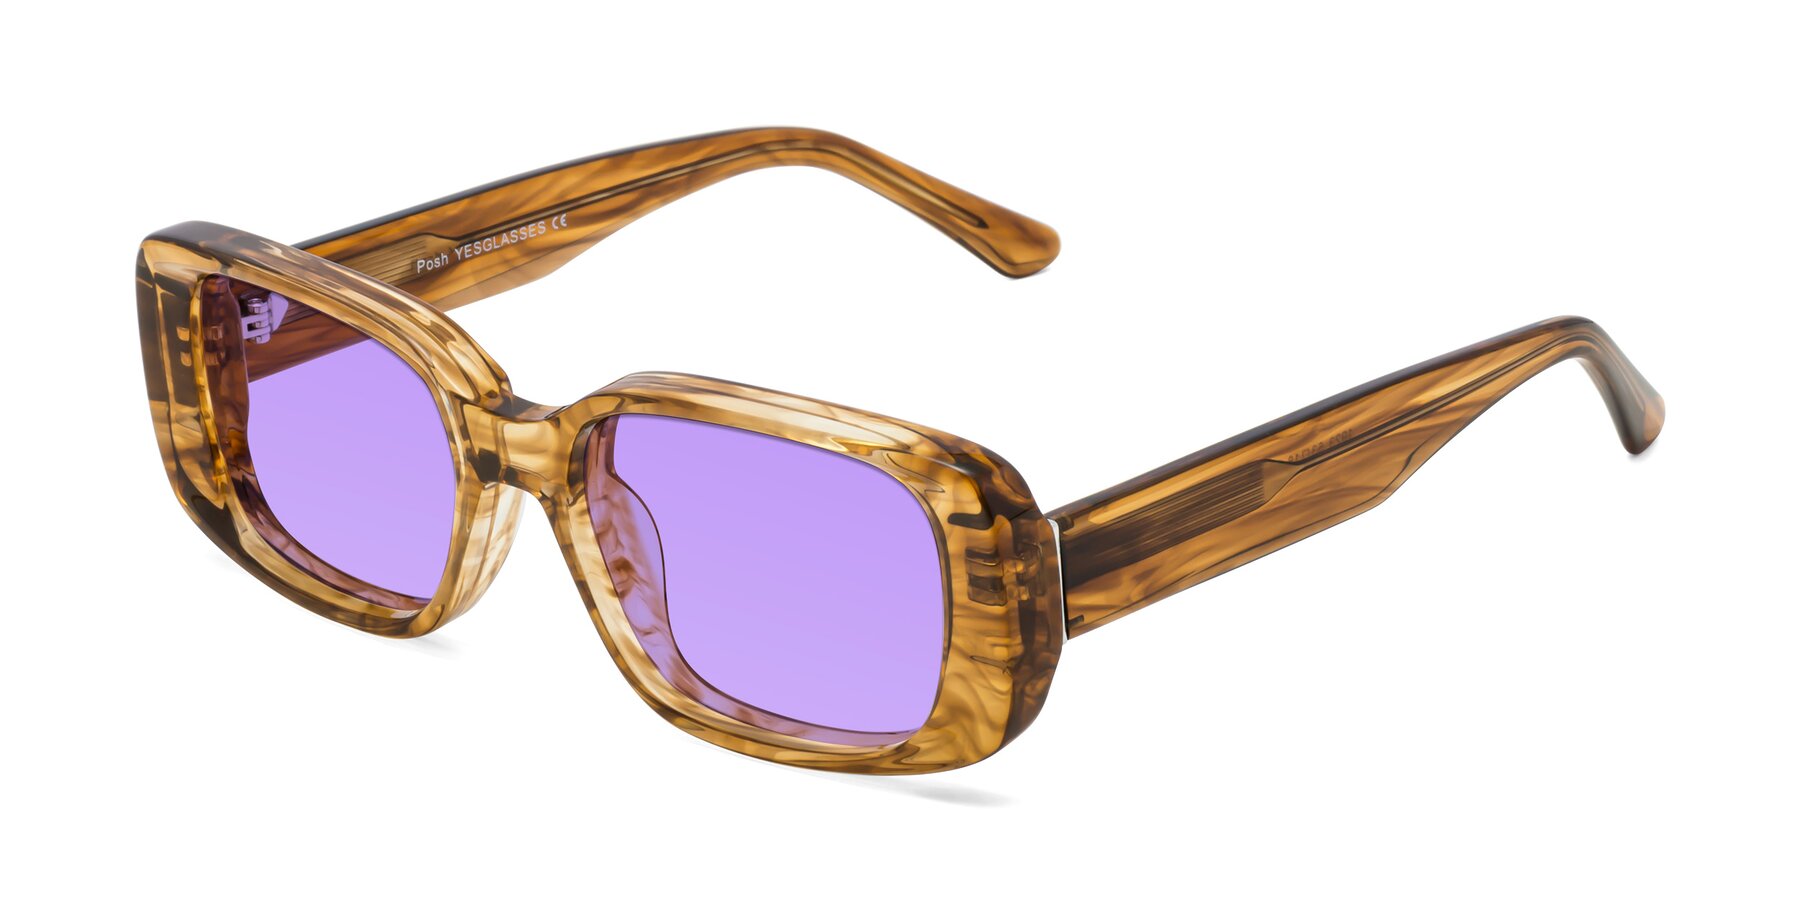 Angle of Posh in Stripe Amber with Medium Purple Tinted Lenses